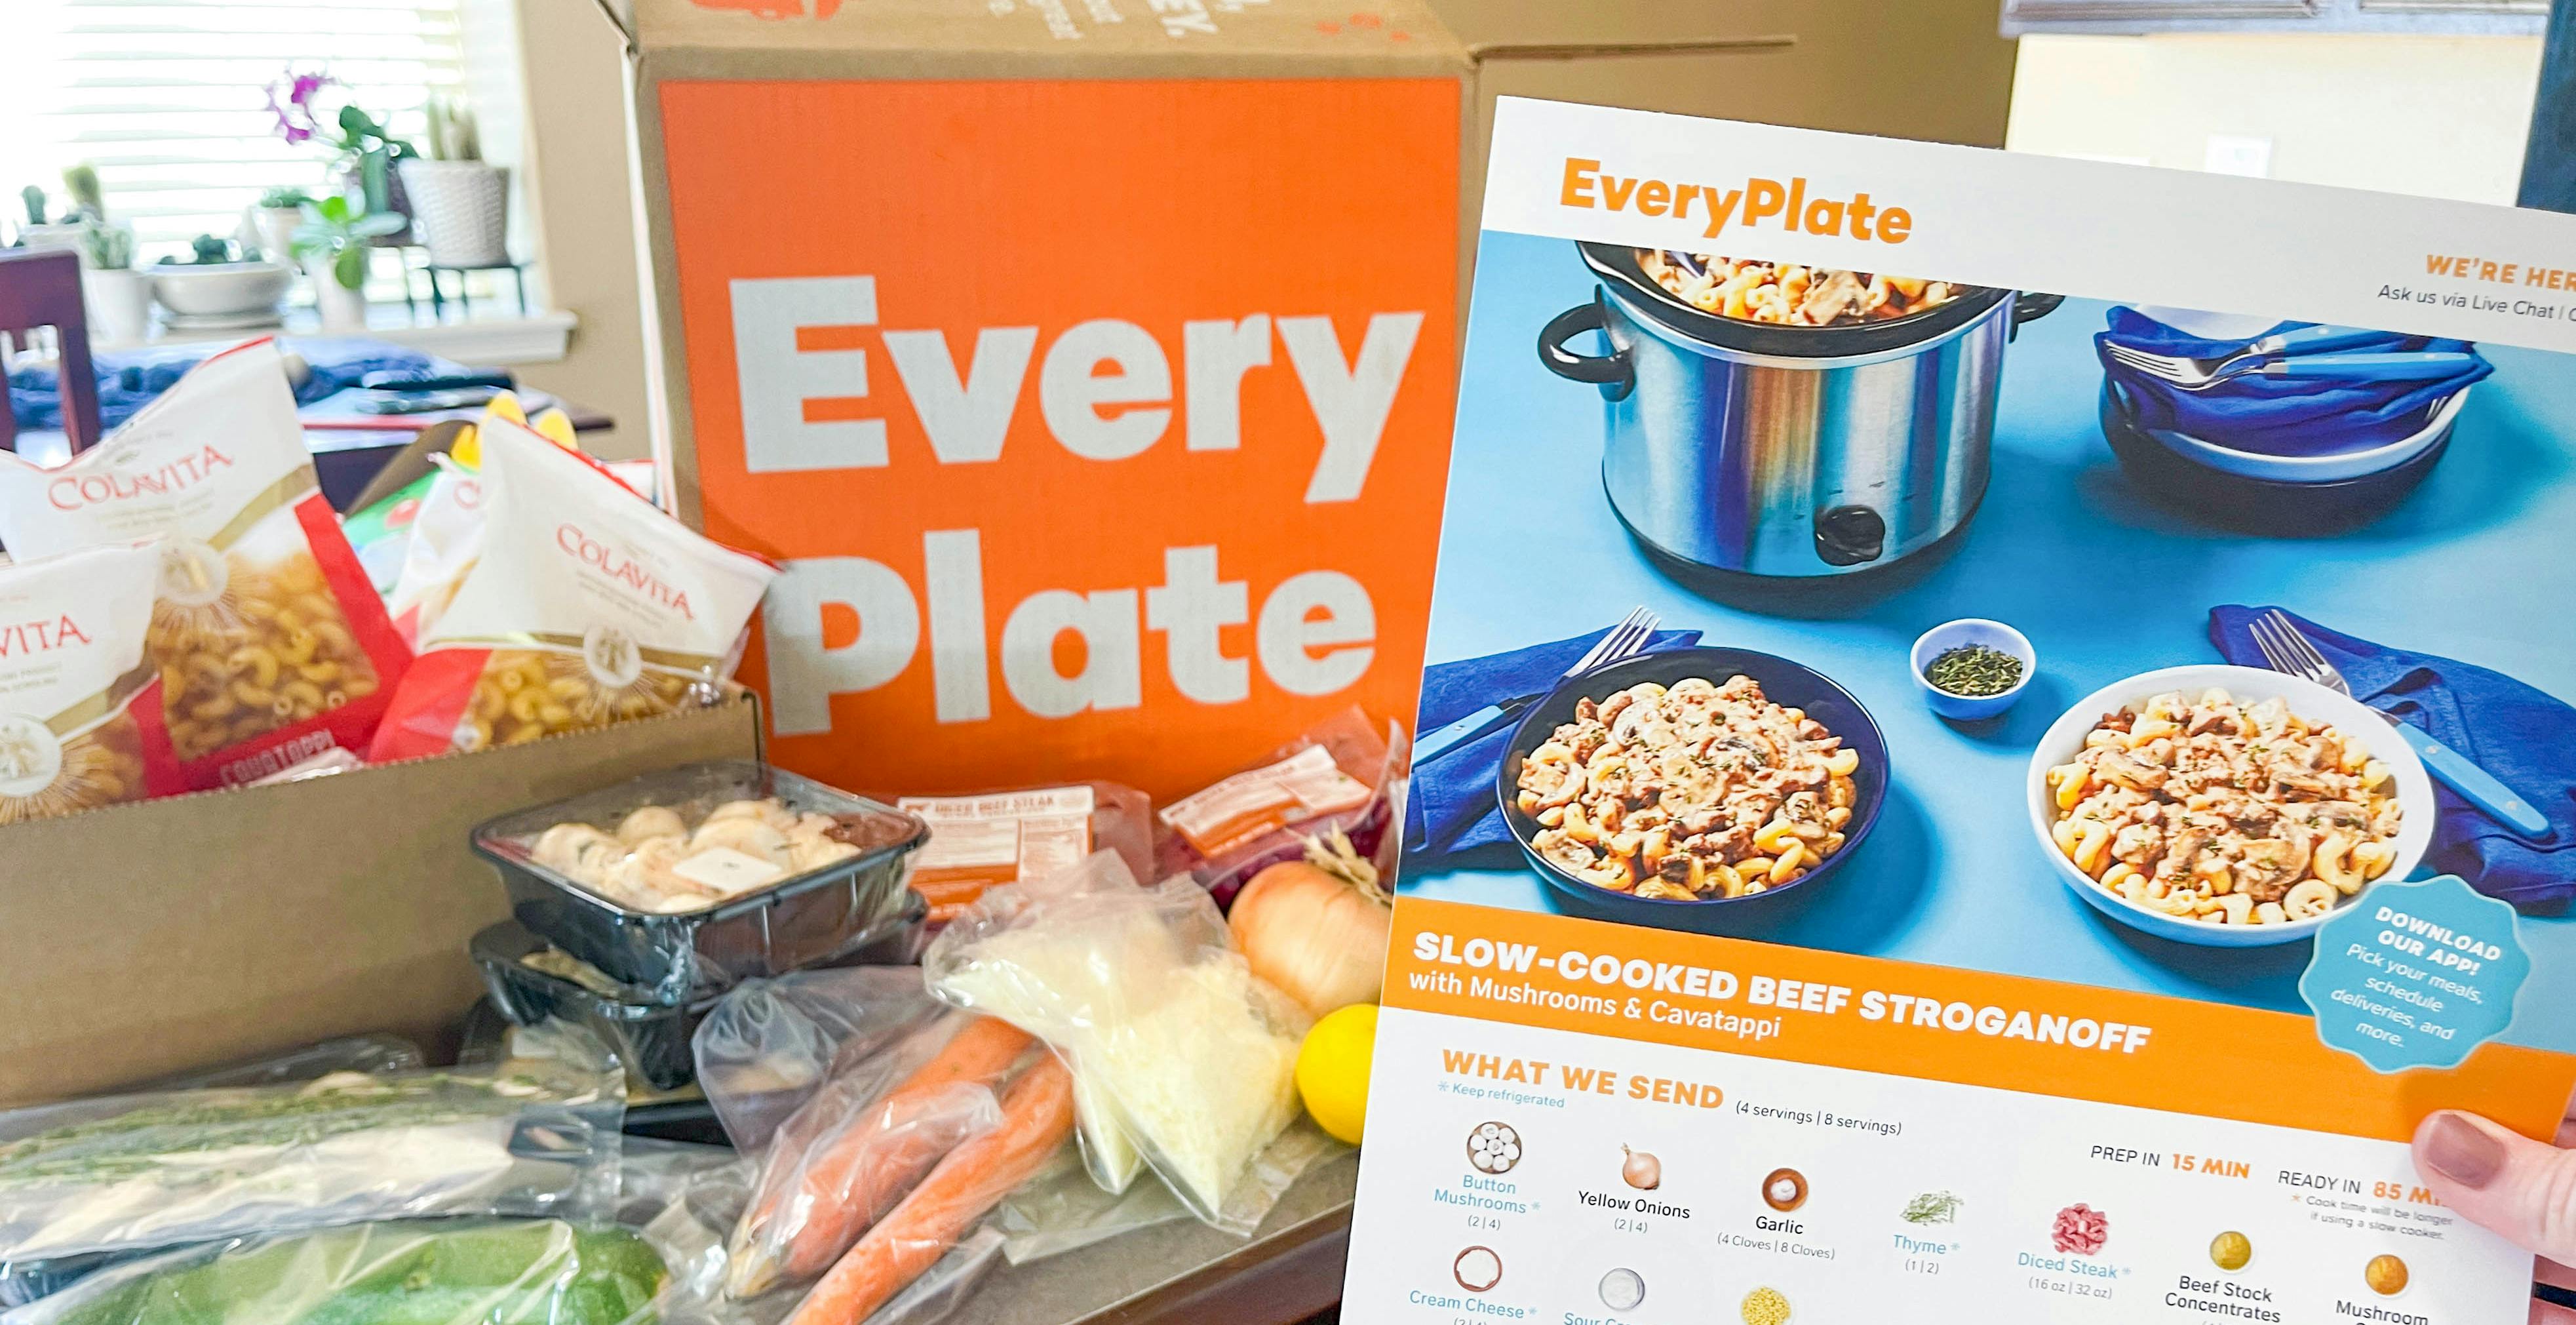 Home Chef Meal Kits  Home Cooking Made Simple - King Soopers